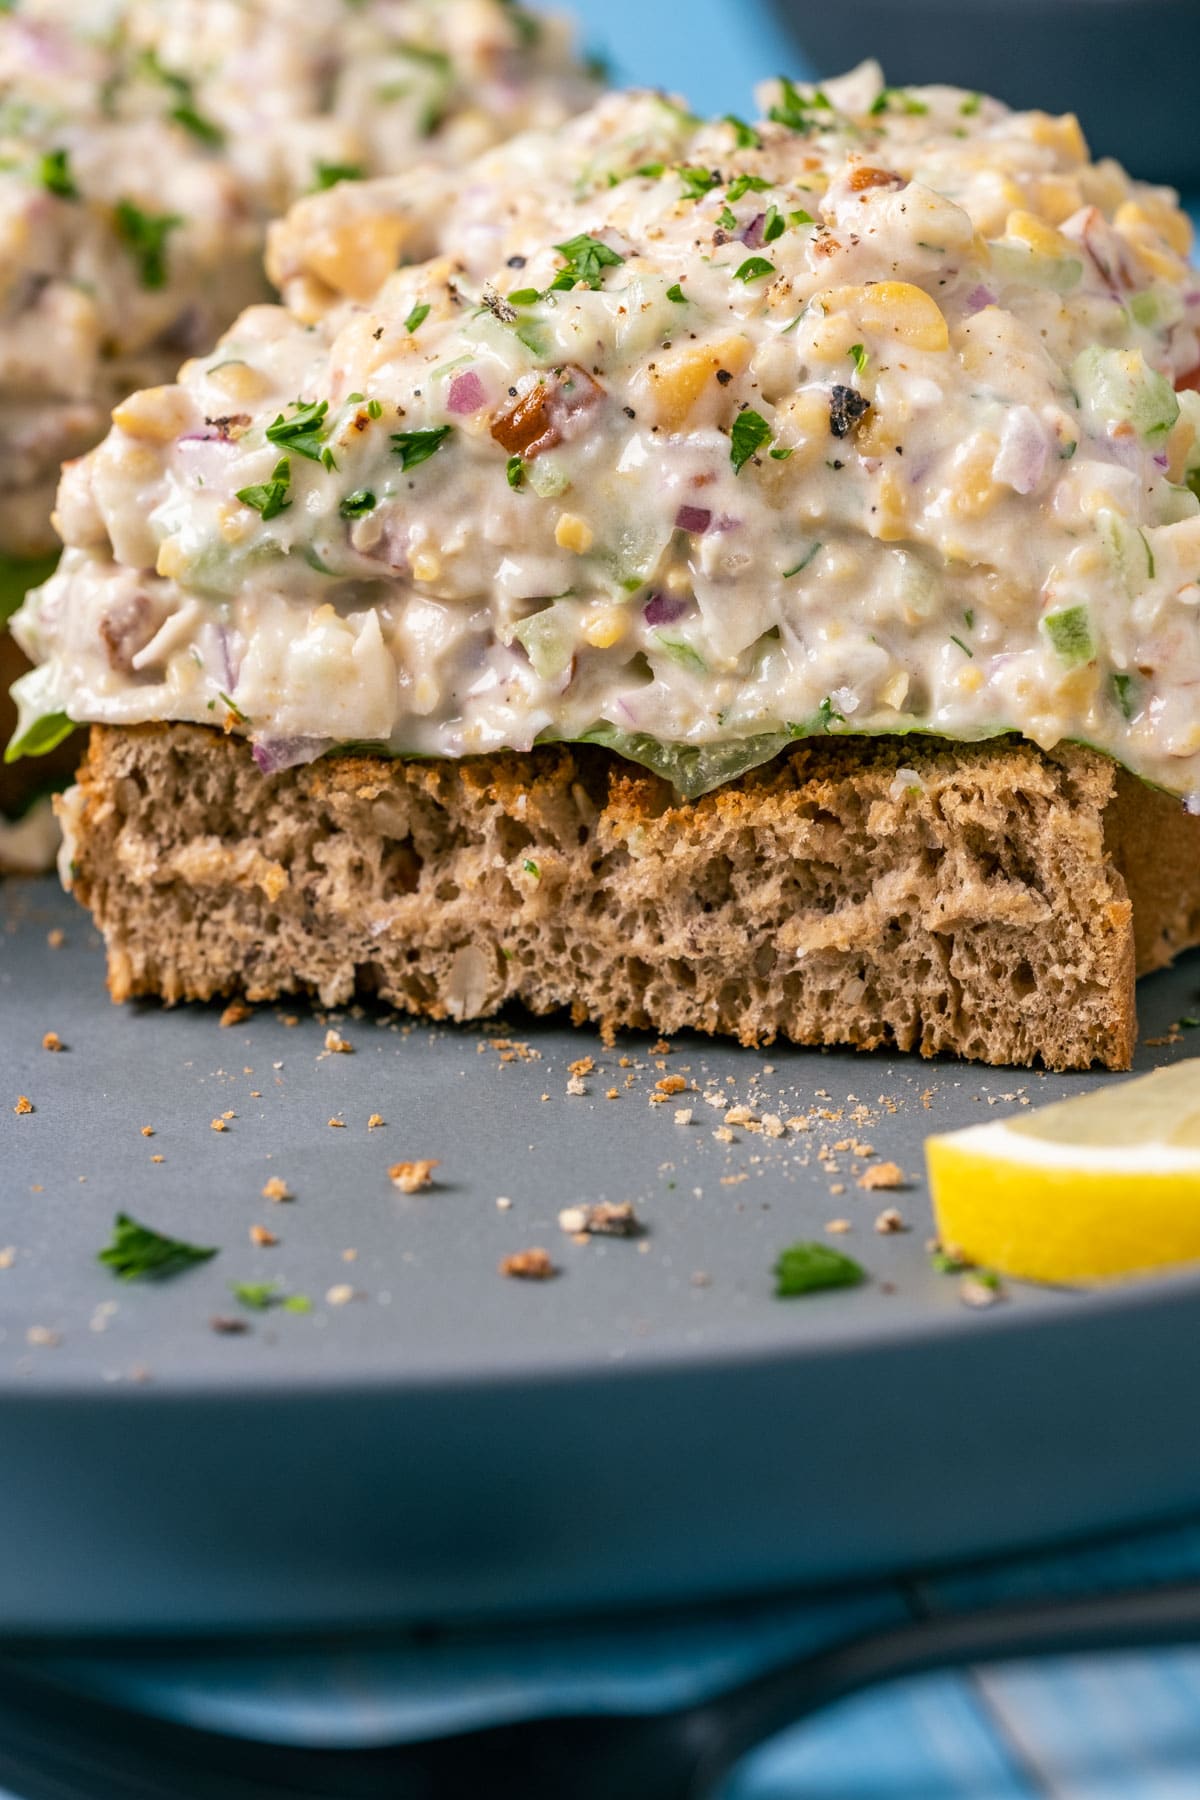 Open faced sandwich topped with vegan chicken salad and sliced in half on a gray plate.